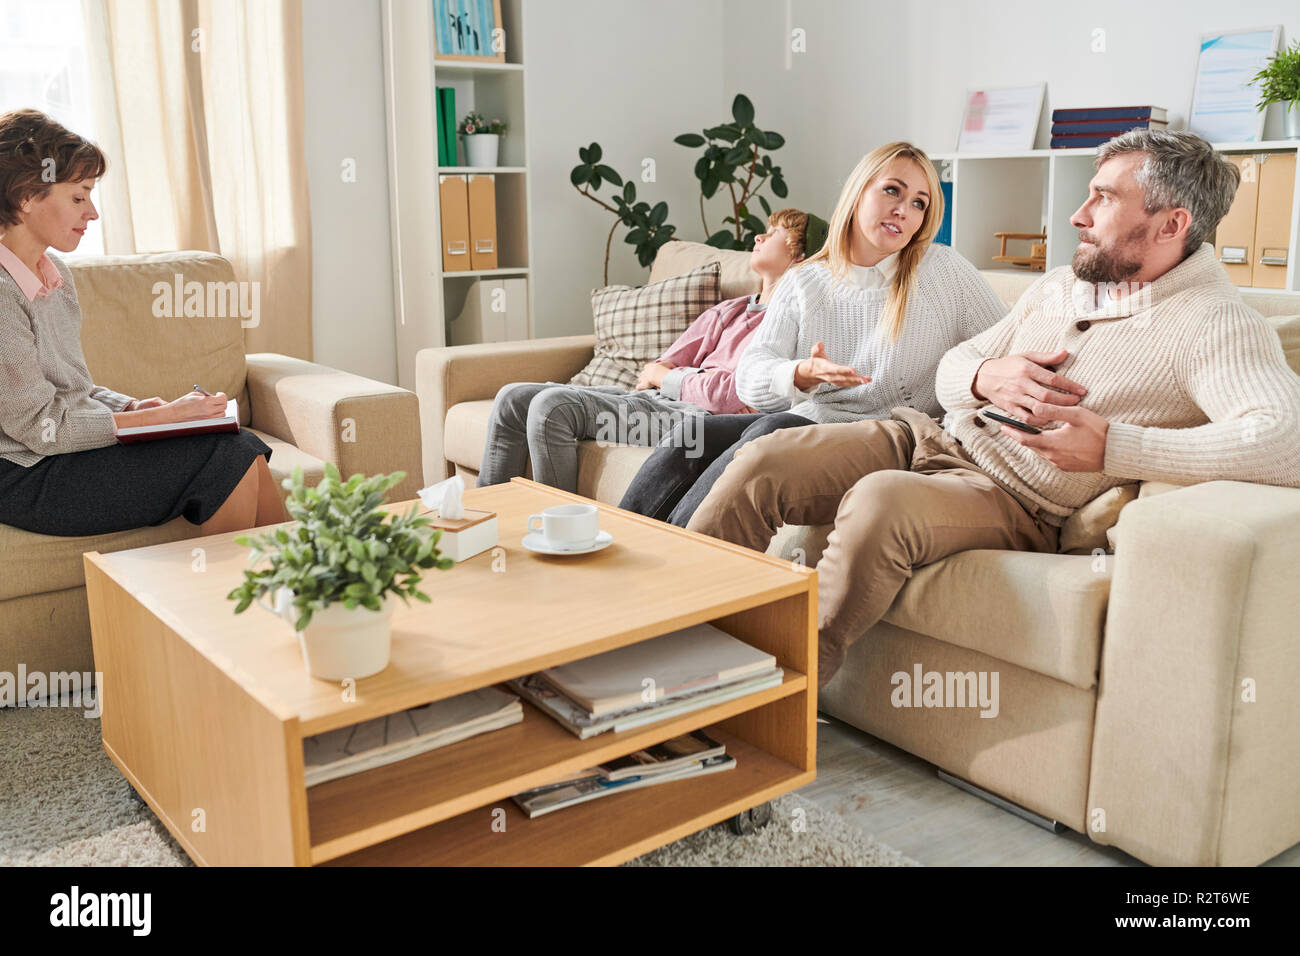 Family with teenager visiting psychologist Stock Photo